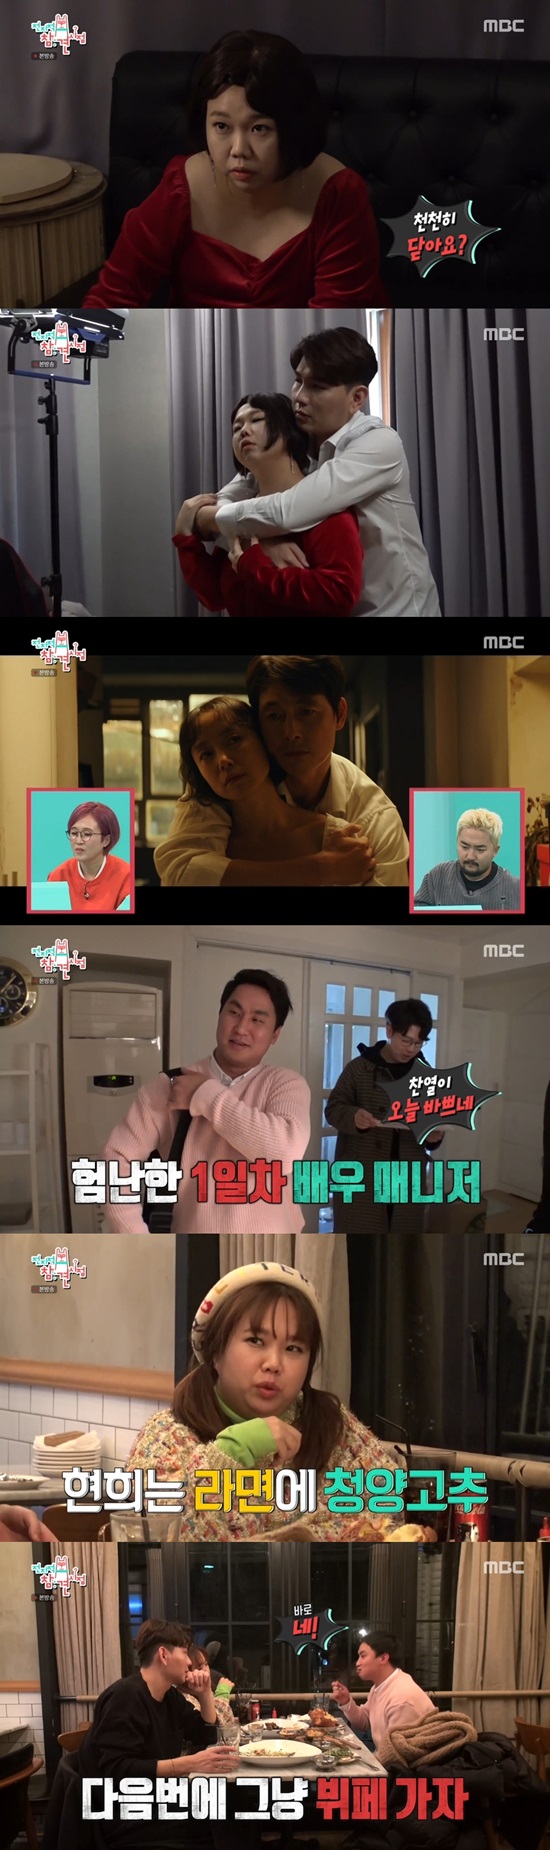 The parody of the Point of Omniscient Interfere Hong Hyon-hee and Jason couple captured not only the Jeon Do-yeon and Jung Woo-sung but also the viewers.In MBC Point of Omniscient Interfere broadcast on the 8th, Hong Hyon-hee and Jason couple transformed into Jeon Do-yeon and Jung Woo-sung from head to toe, and started shooting a full-scale movie parody.The Hong-Sun couple, who checked the script and practiced in time, showed nervousness ahead of the filming.For a while, the Hong-Sun couple continued to laugh at the misunderstanding when they fell on the room.In addition, the support passion of Manager Park Chan-yeol for Hong Hyon-hee and Jason couple laughed.The manager showed off the care that was not timed unlike the burning motivation. The Hong-Man couple titled with the manager who came to care when he did not need it.The parody video, which contains the efforts of the three people, boasted the original video and the high synchro rate.Hong Hyon-hee said, Jeon Do-yeon and Jung Woo-sung have been enjoying the parody video.He invited me to the movie preview. The appearance of the Hong-Sun couple and the manager who eat after successfully taking a parody video rose to 9.7% of the highest audience rating.Hong Hyon-hee, who usually likes Korean food, challenged the style there.In the end, Hong Hyon-hee, who did not eat well because he did not fit his taste, said, I have to go home and boil it if I go home.Point of Omniscient Interfere is broadcast every Saturday at 11:05 pm.Photo = MBC Broadcasting Screen